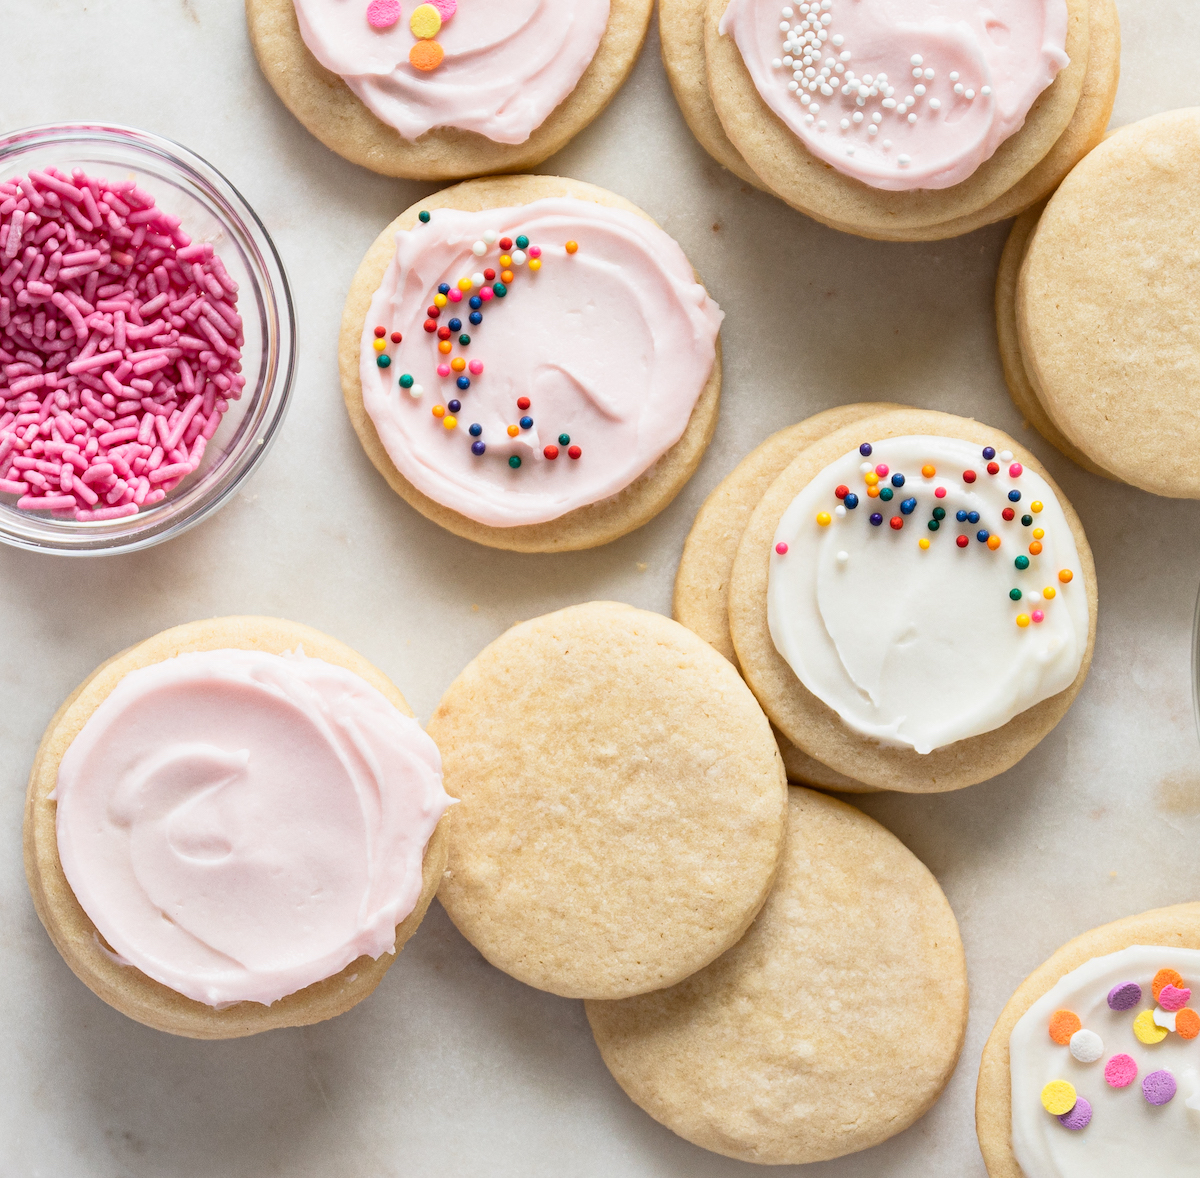 Sugar cookies with vanilla icing and without.